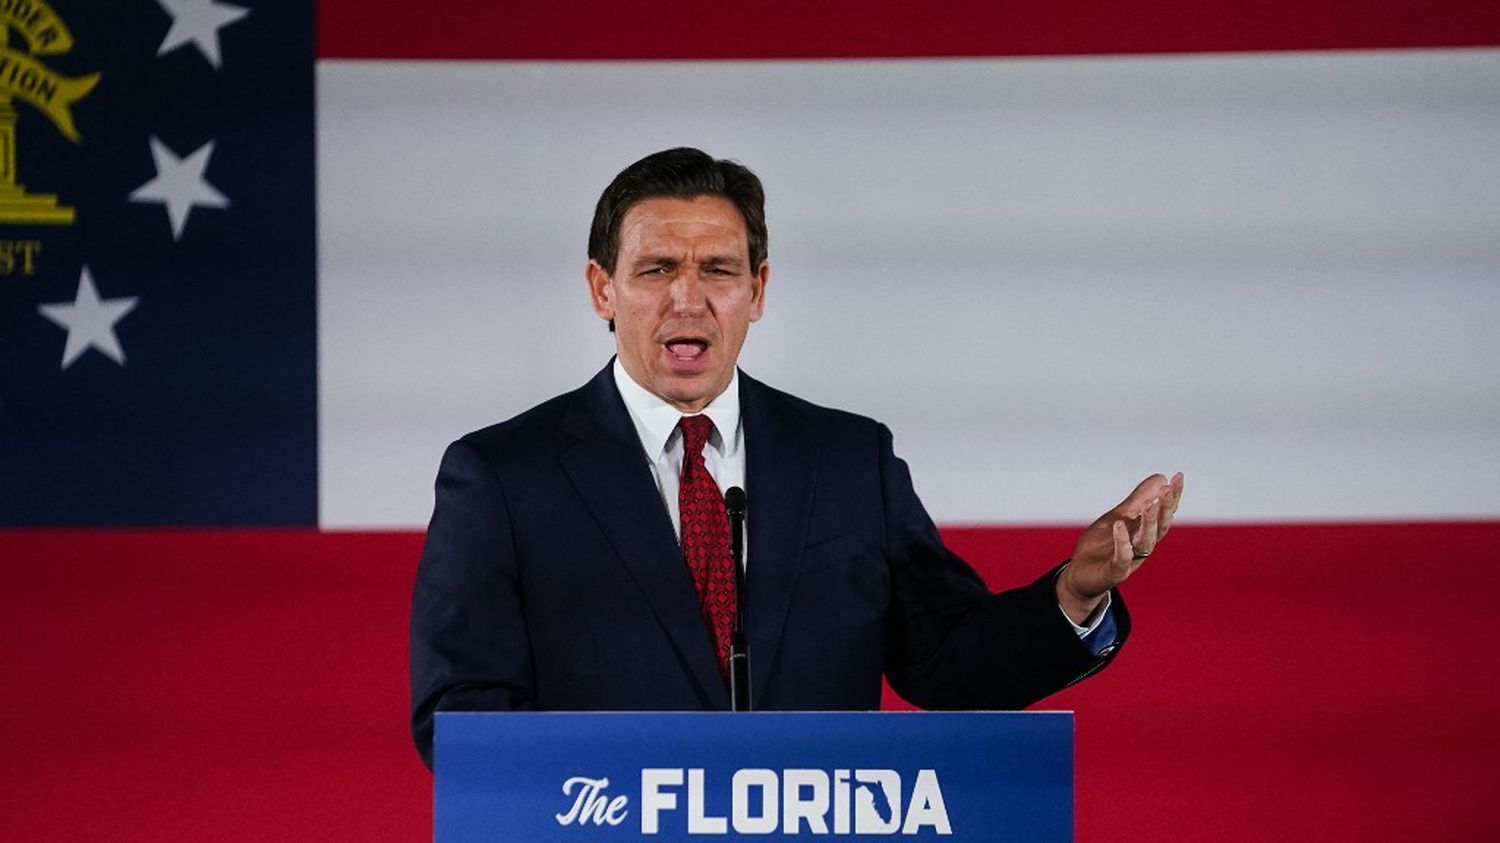 United States: Republican Ron DeSantis has filed his formal candidacy for the 2024 presidential election
